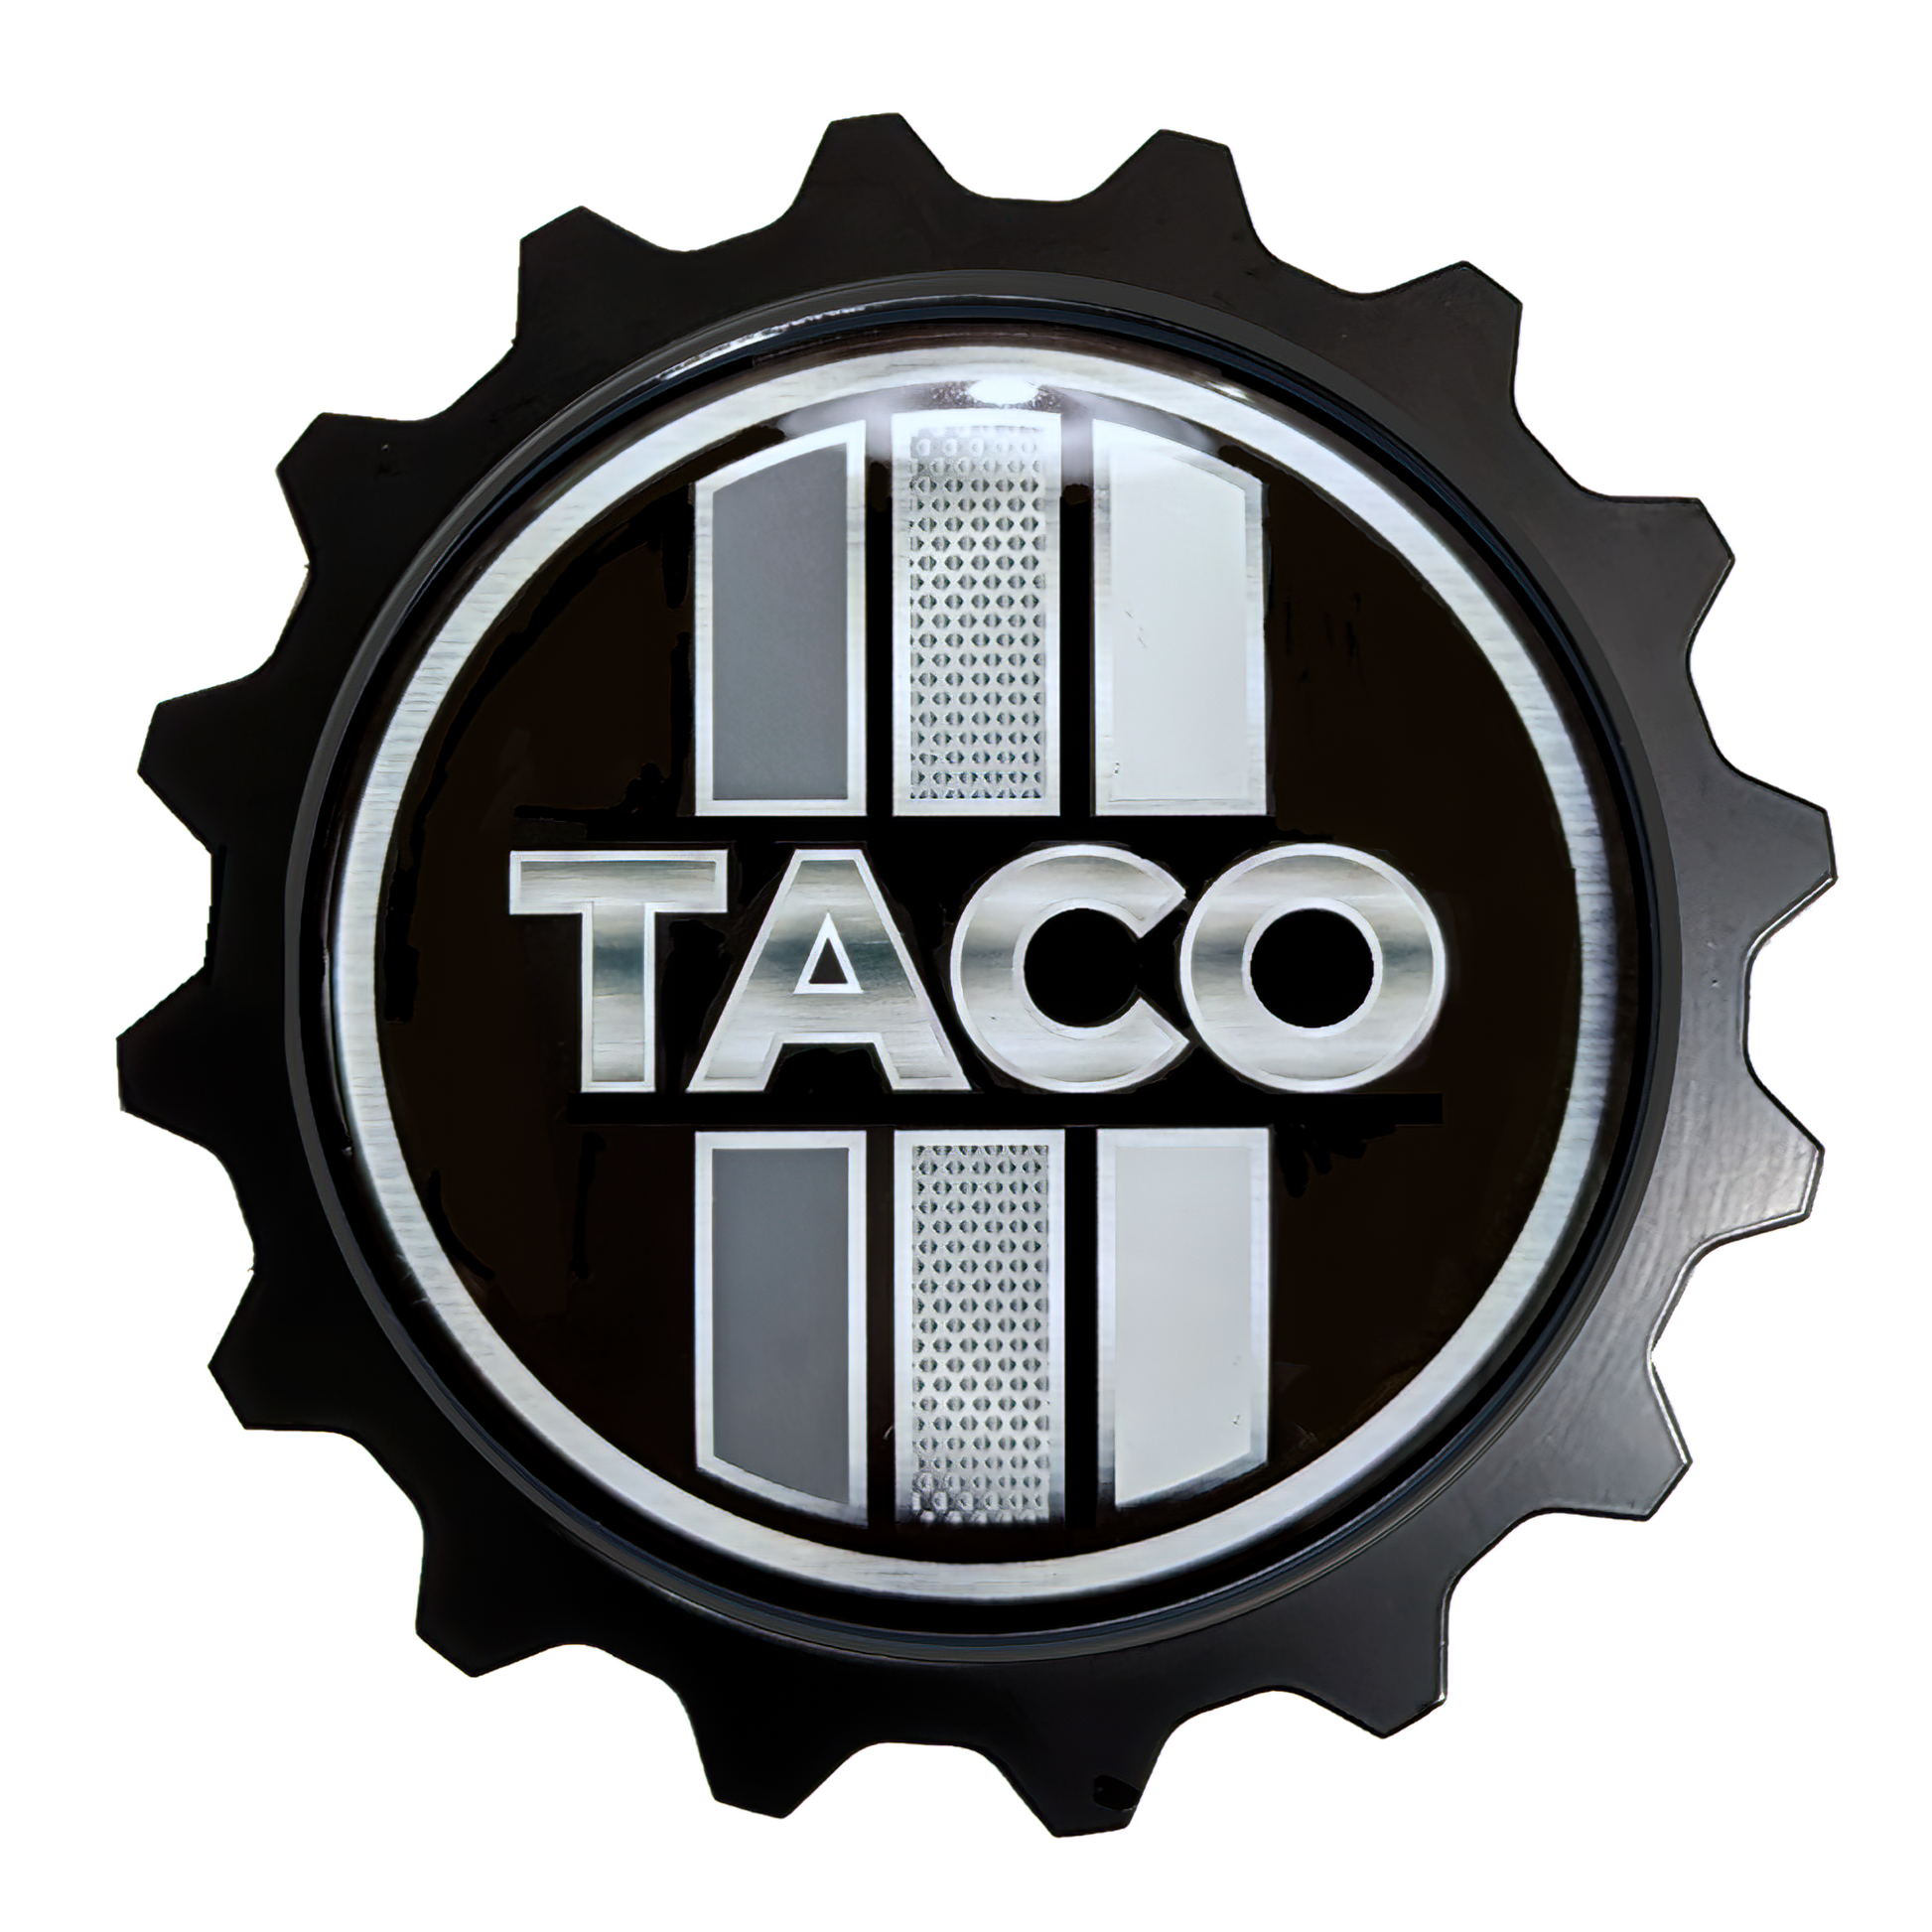 Standard Tacoma Grille Badge Tacoma Badge Emblem - Looking for Tri Color aftermarket grille or badge parts for  Tacoma SR5, TRD Sport, TRD Off-road, TRD Pro Limited & fitting of the Tacoma Lifestyle or Largest Forum Tacoma World